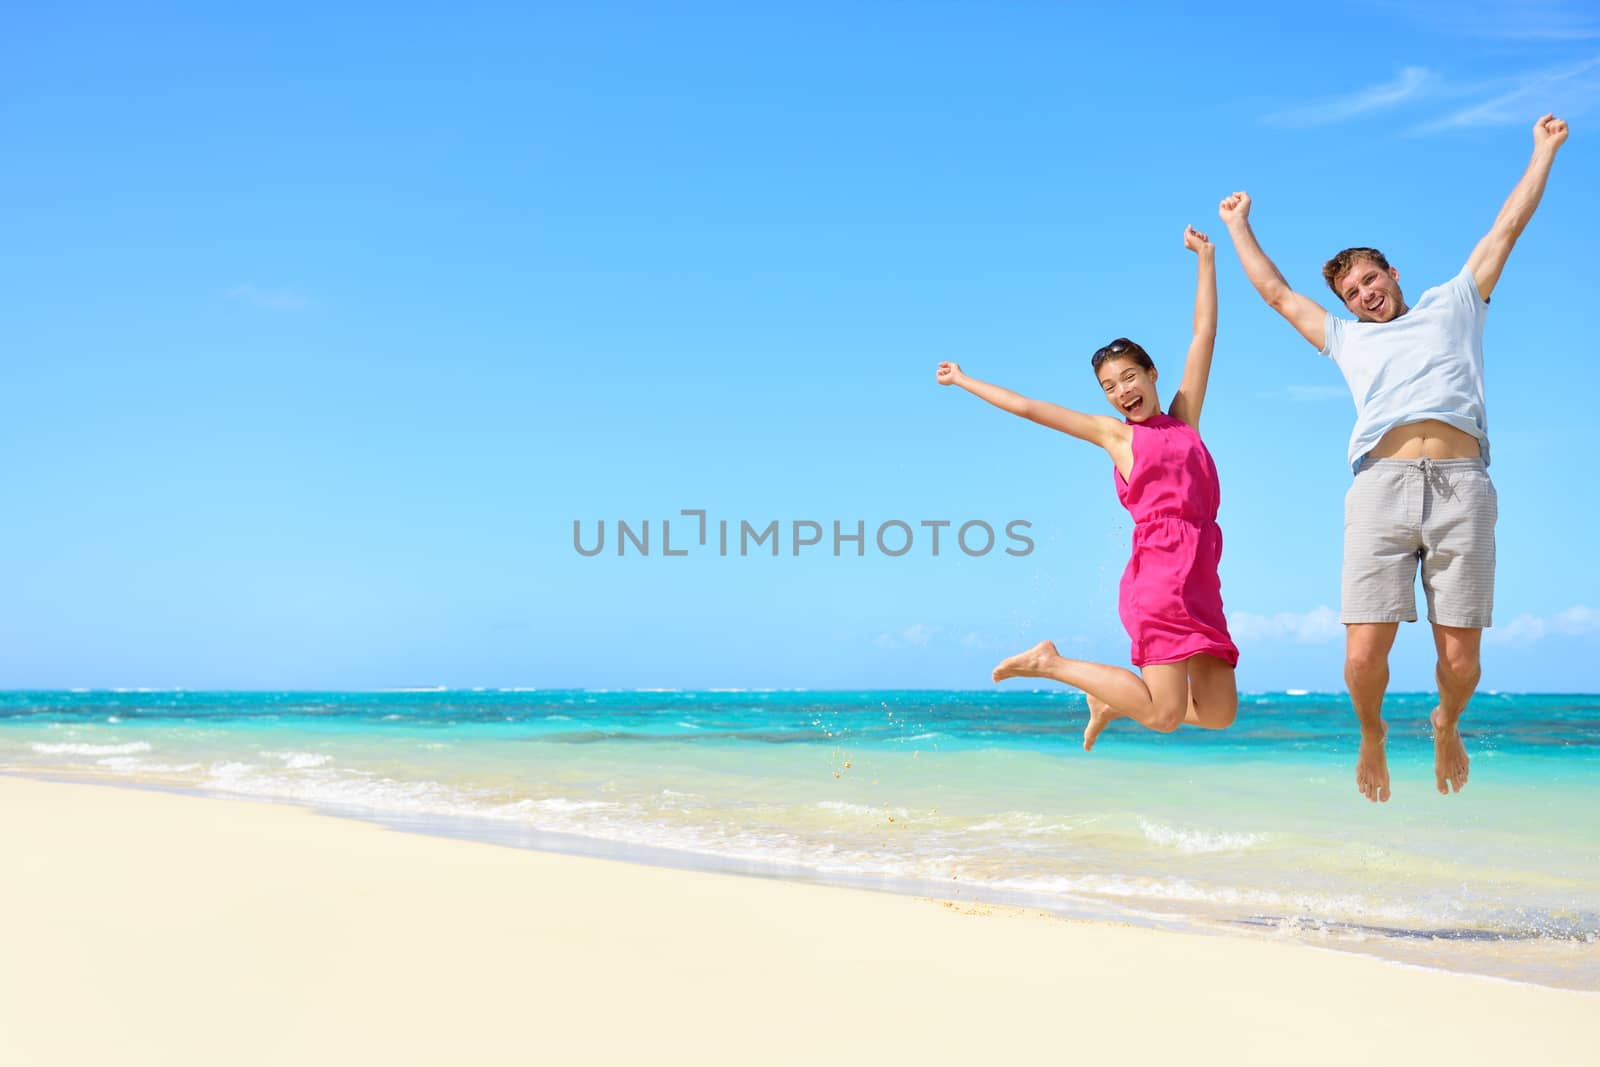 Happy couple tourists jumping on beach vacations. Travel concept of young couple cheering for summer holidays showing success, happiness, and joy on perfect white sand tropical beach under the sun.